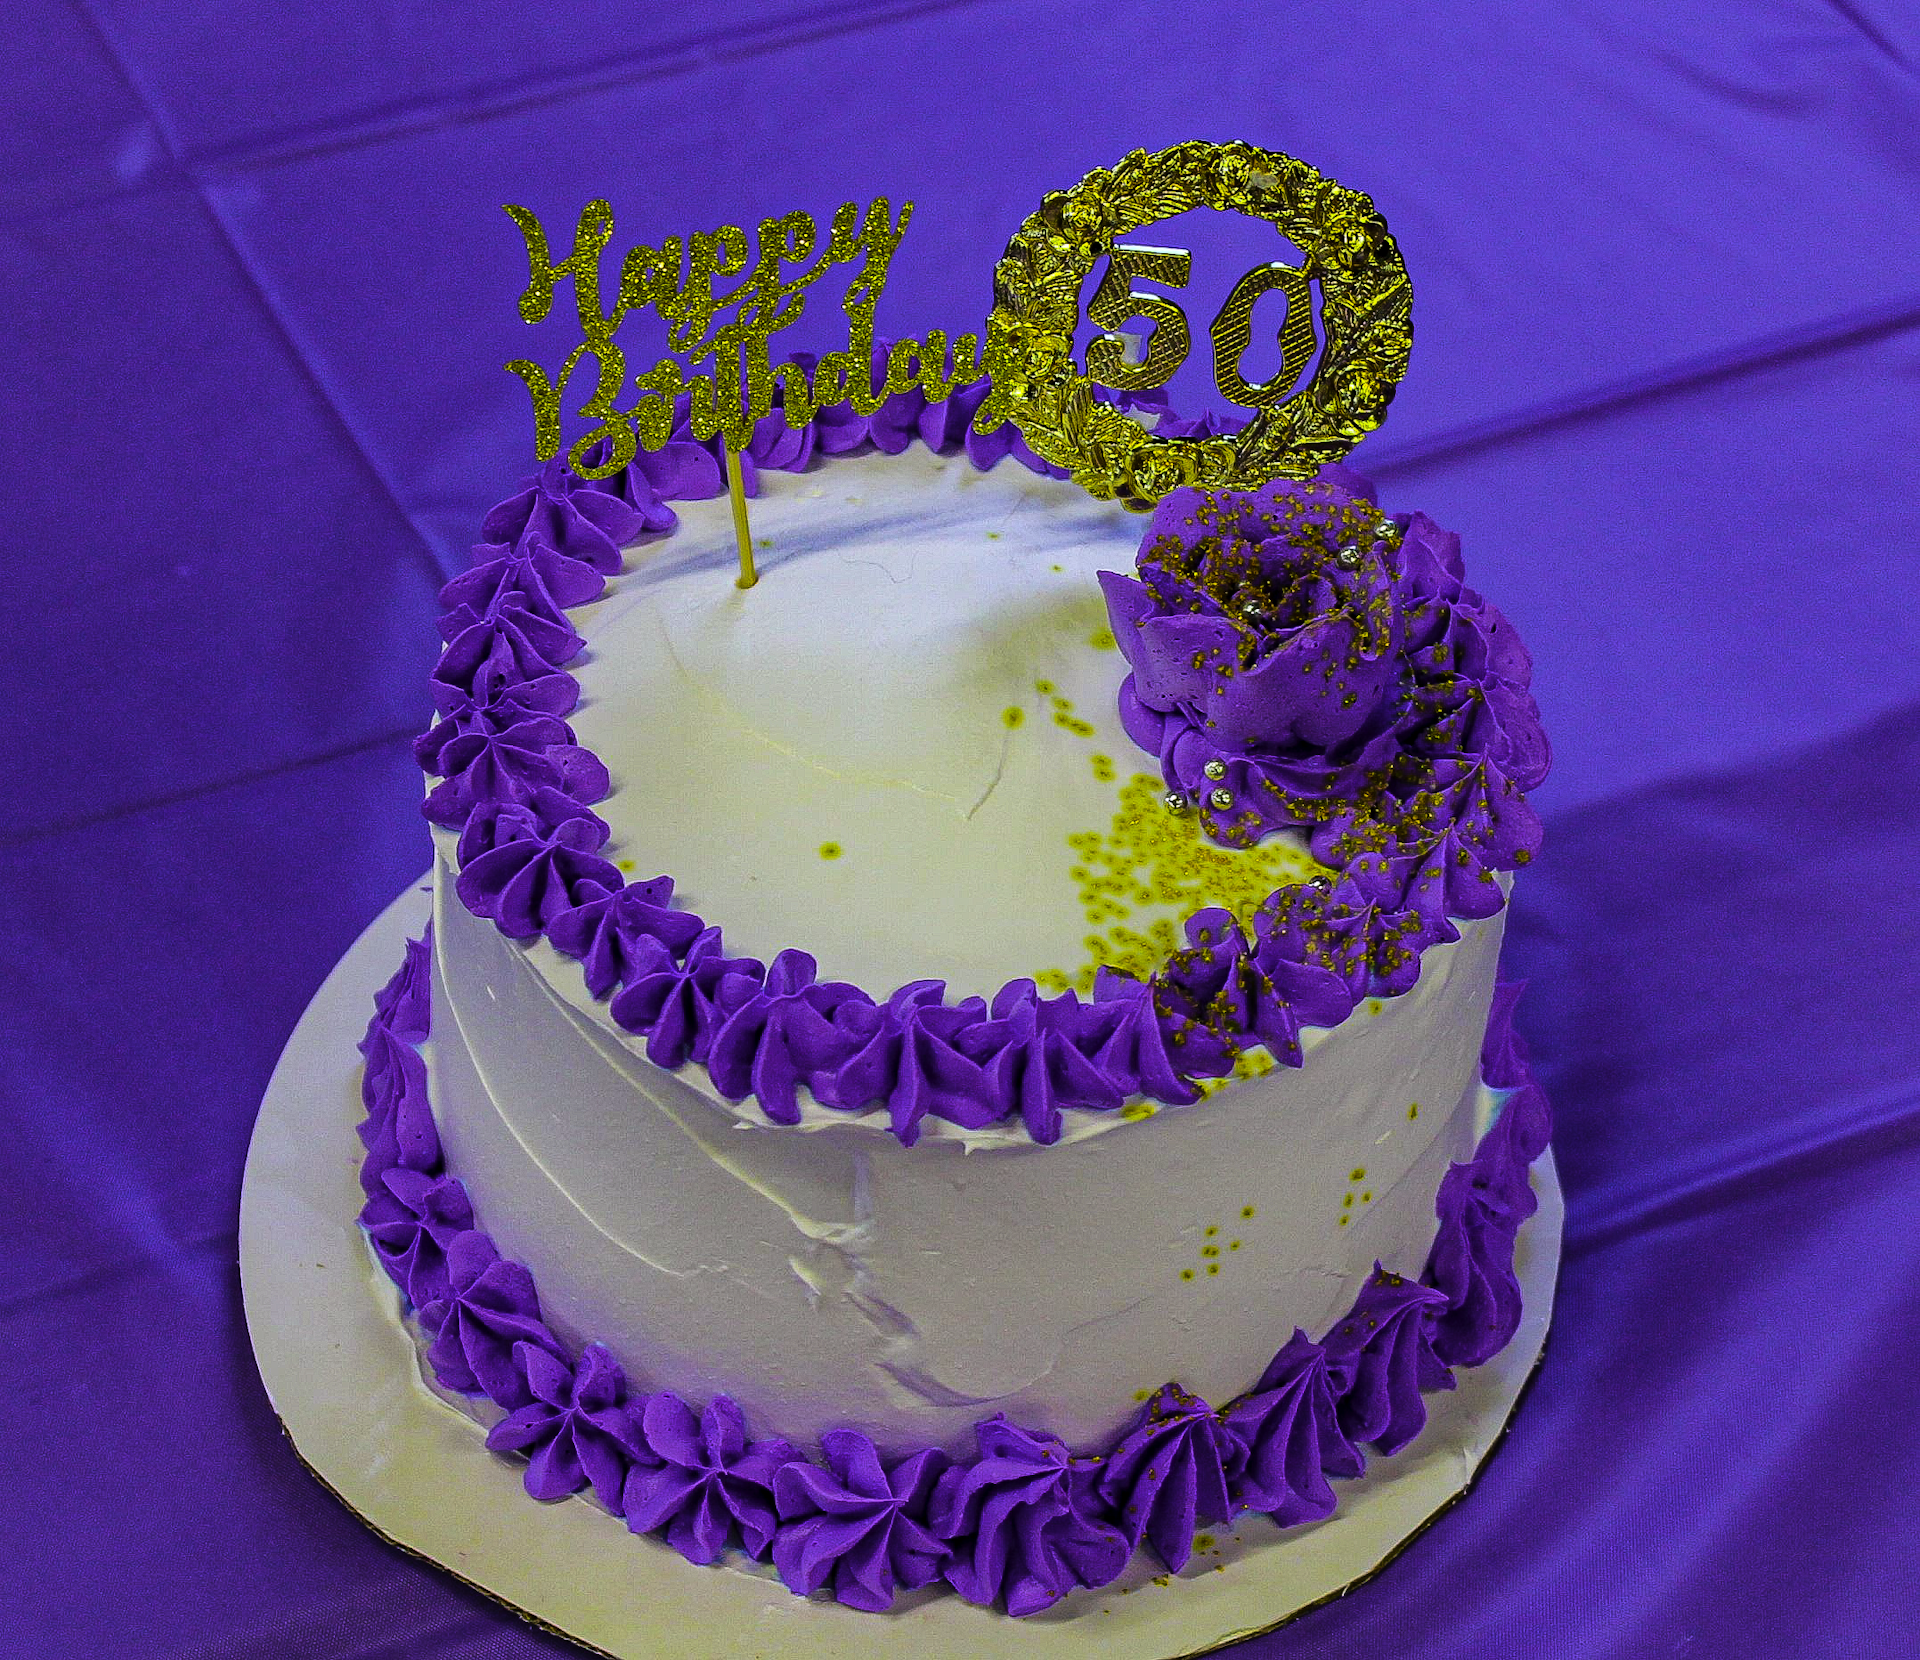 8in. cake with white and purple frosting